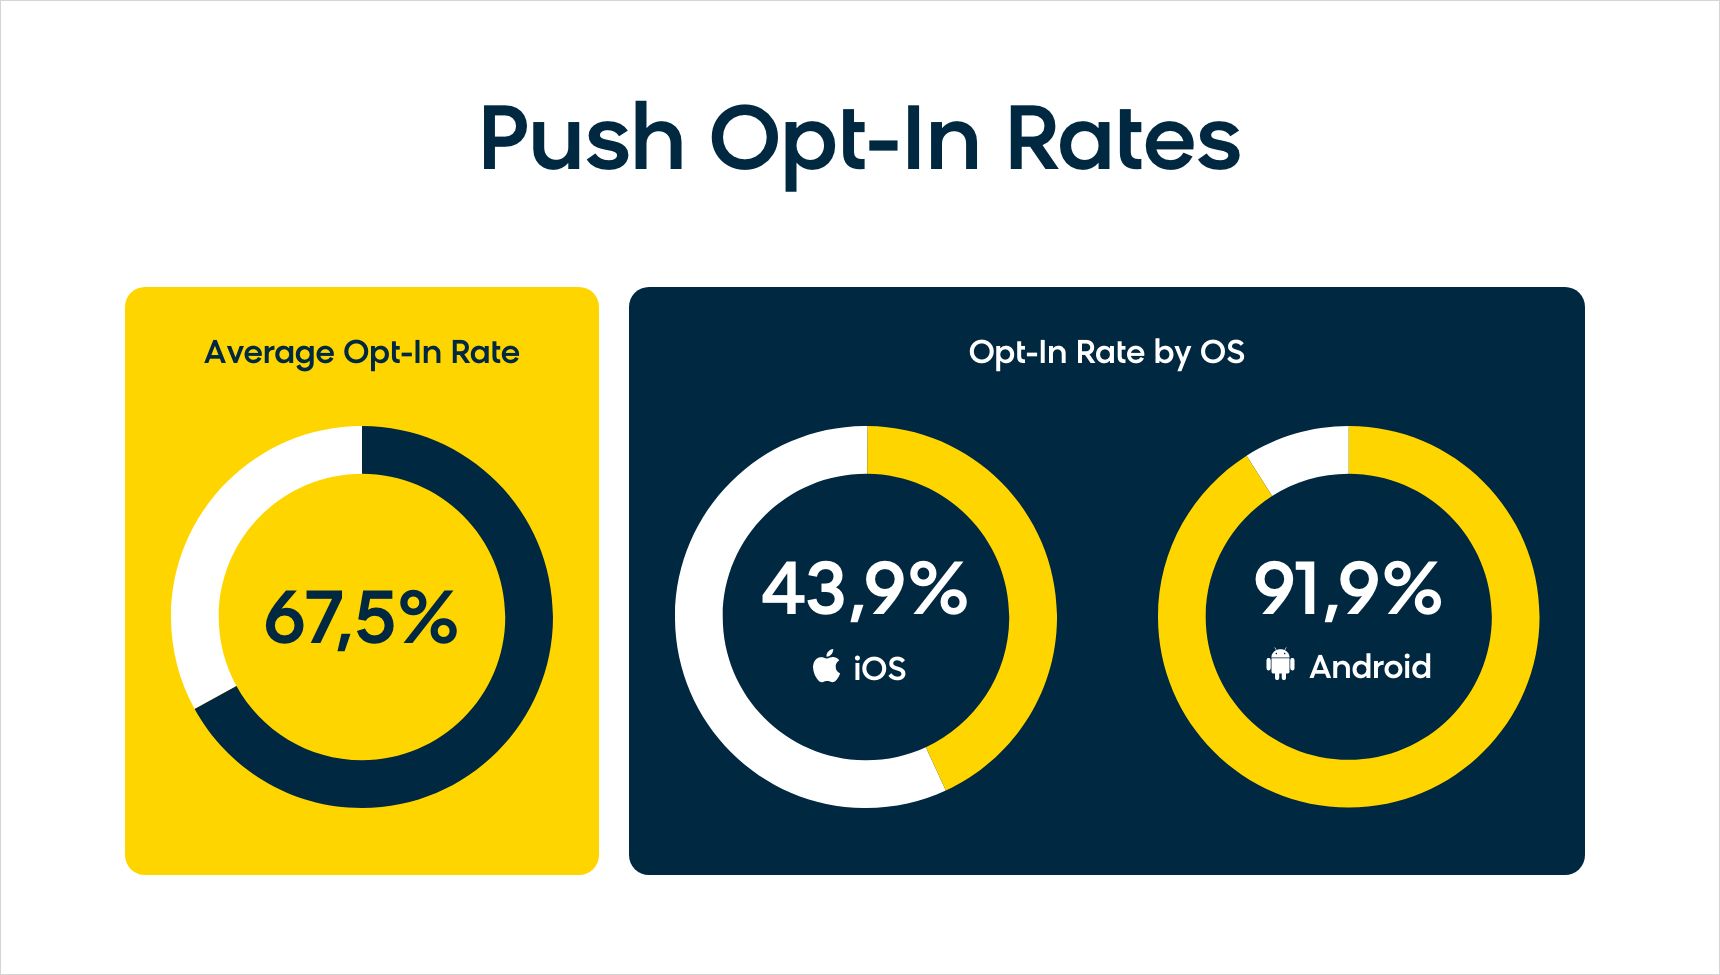 Android users have an exceptionally high average opt-in rate of 91% with the automatic push notifications opt-in model, while the average opt-in rate for iOS is just below 44%.